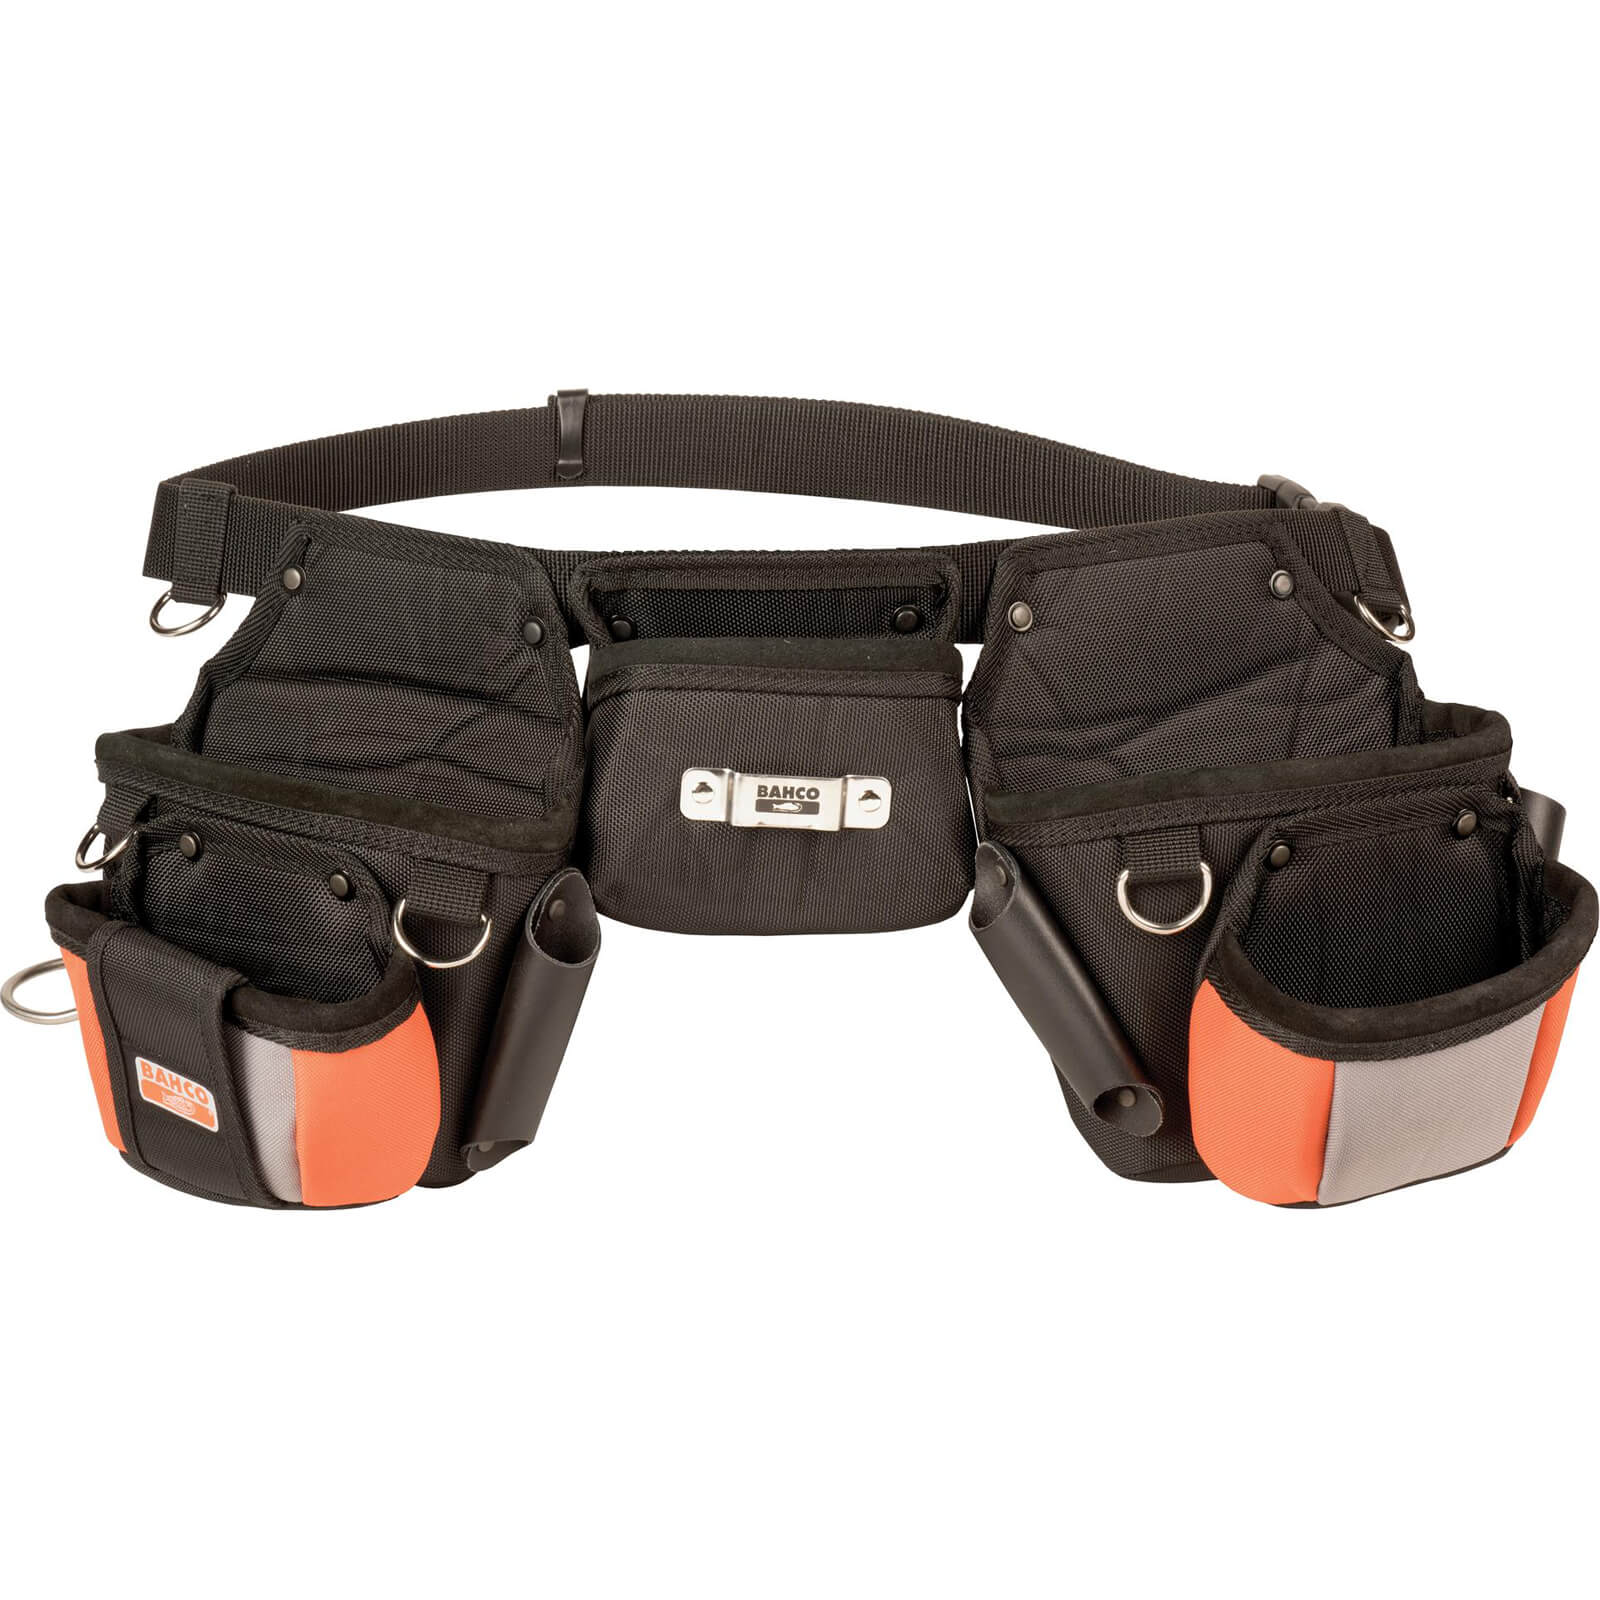 Image of Bahco 3 Pouches Tool Belt